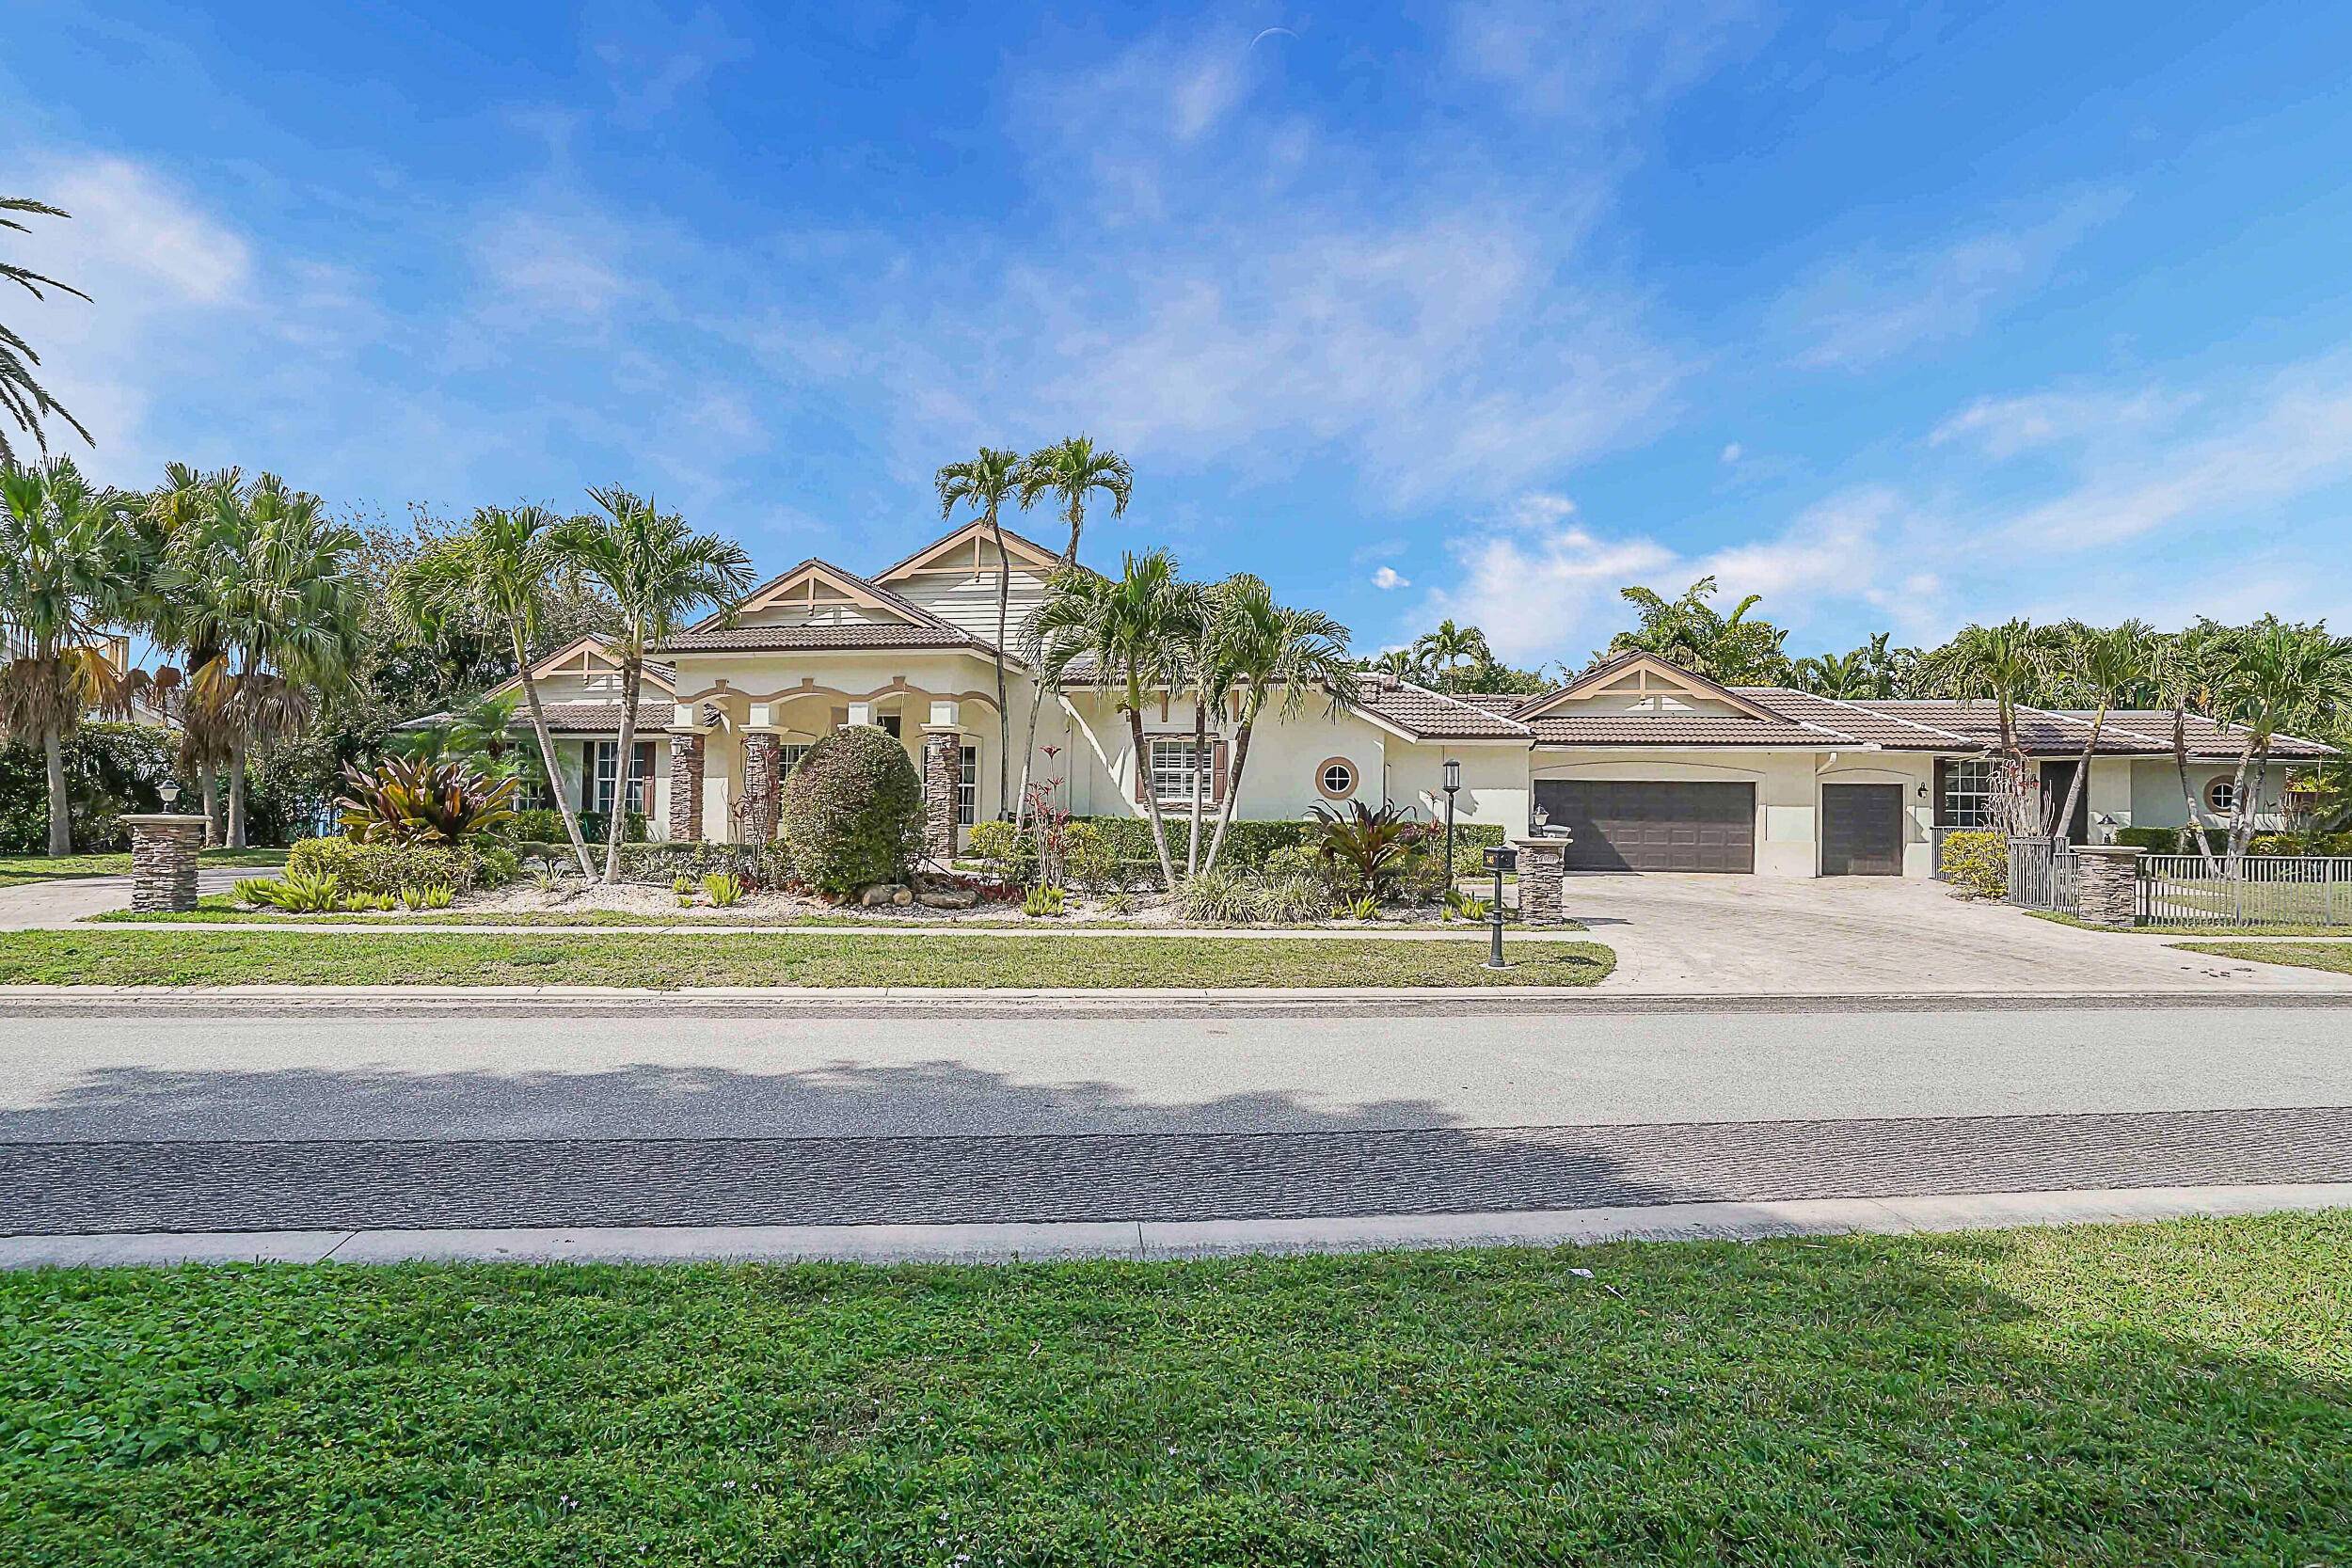 MOTIVATED SELLERS come view this stunning 3 4 Acre Estate Pool Home plus Guest House on a corner private lot with eye catching curb appeal, circular travertine driveway, 3 car ...